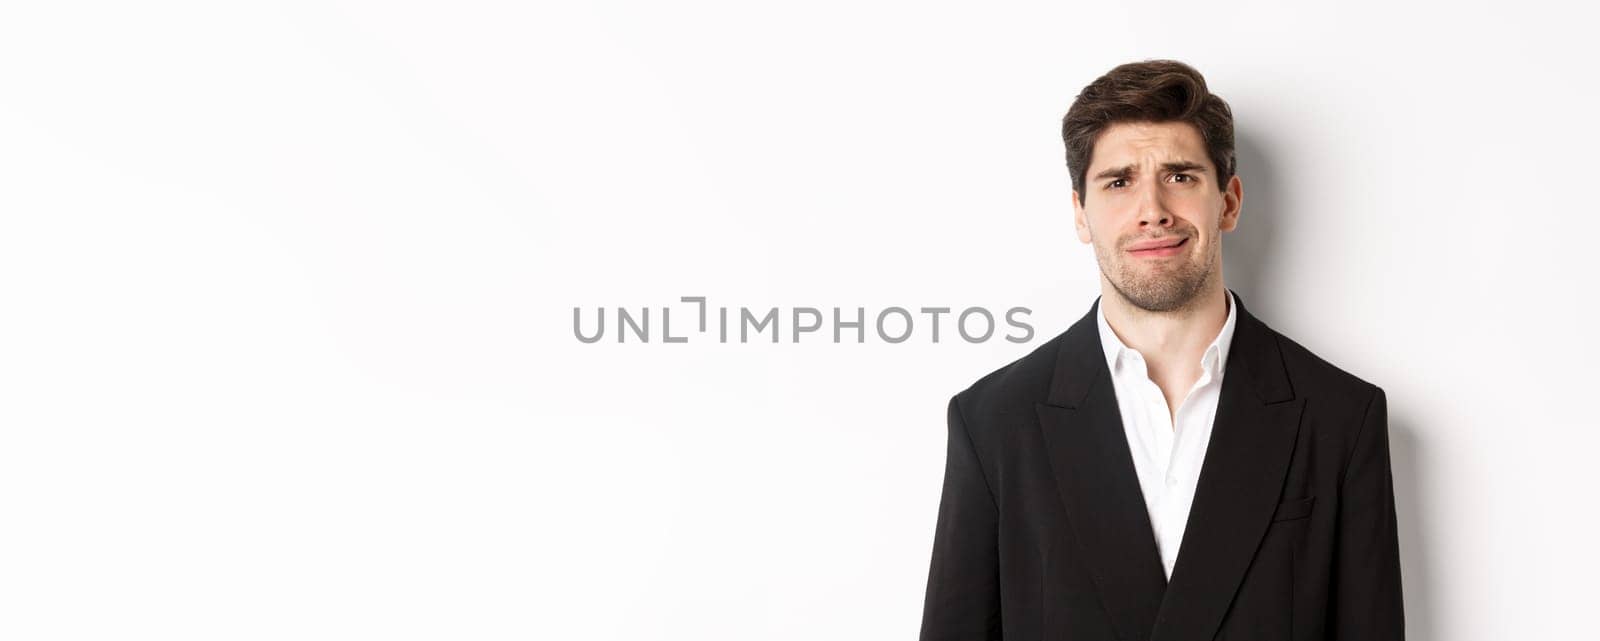 Close-up of confused handsome man in suit, grimacing and looking perplexed, wearing trendy suit, standing against white background.